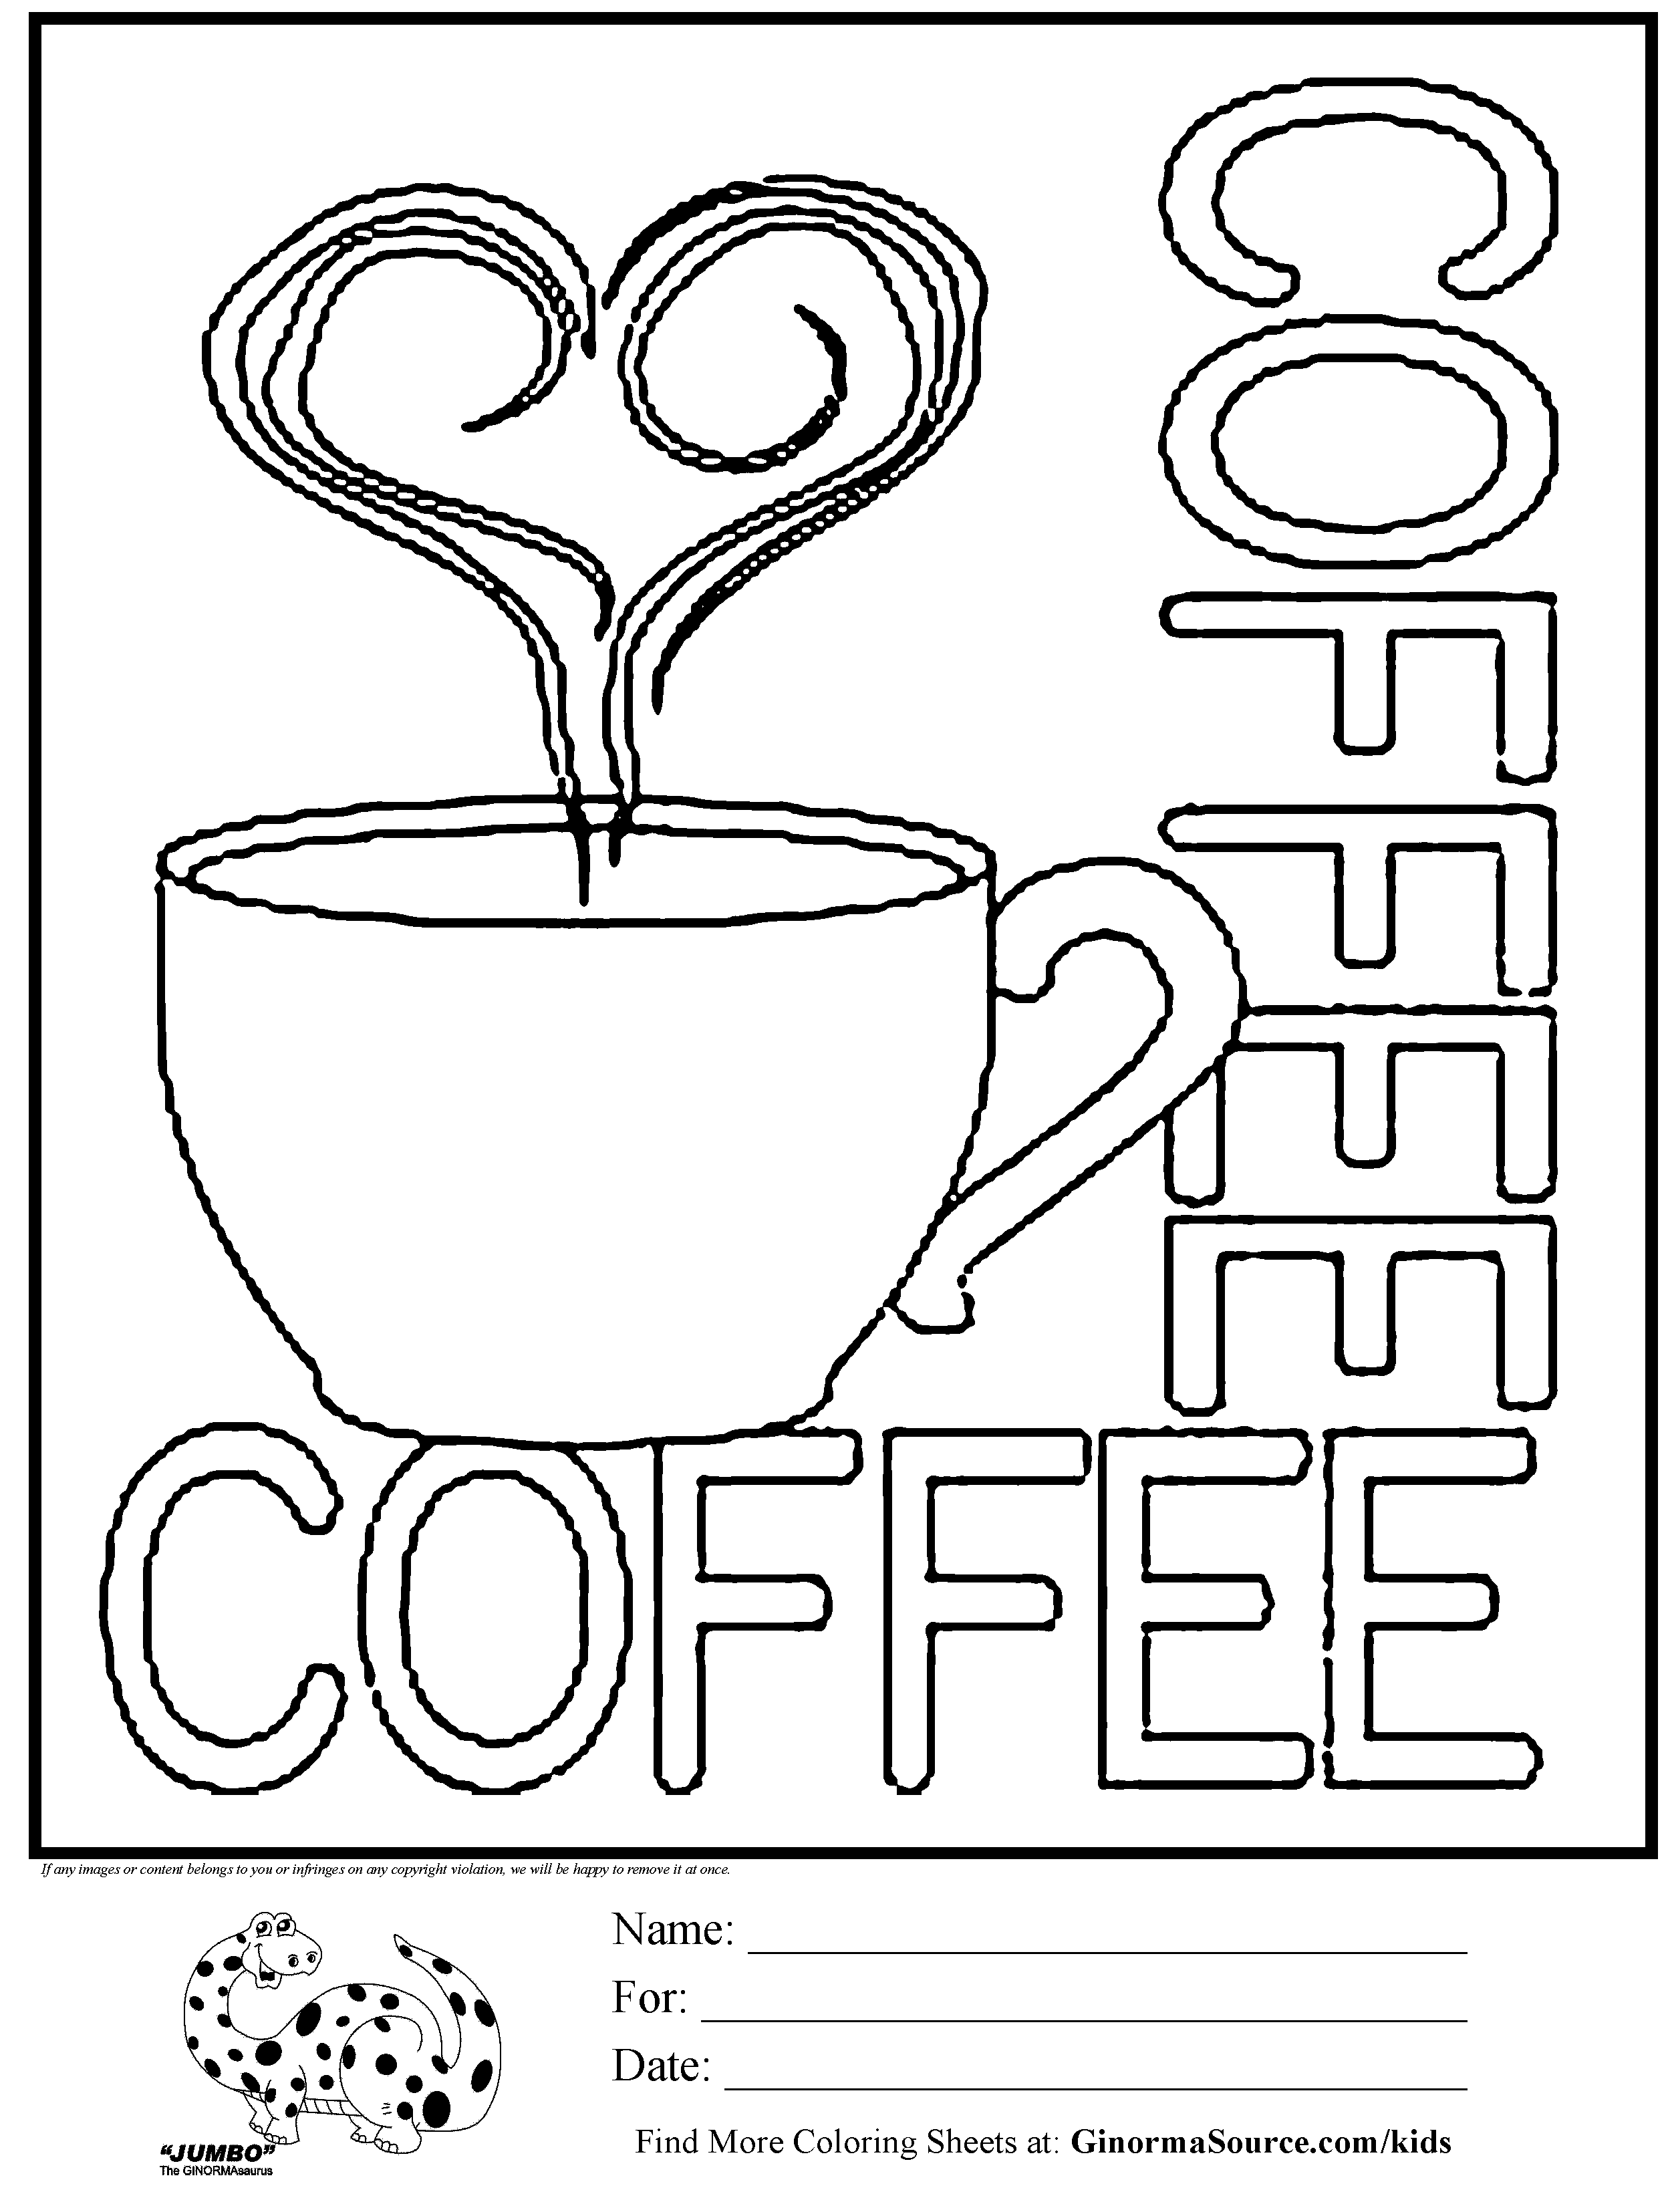 Coffee coloring sheet free coloring pages coloring pages coloring pages to print